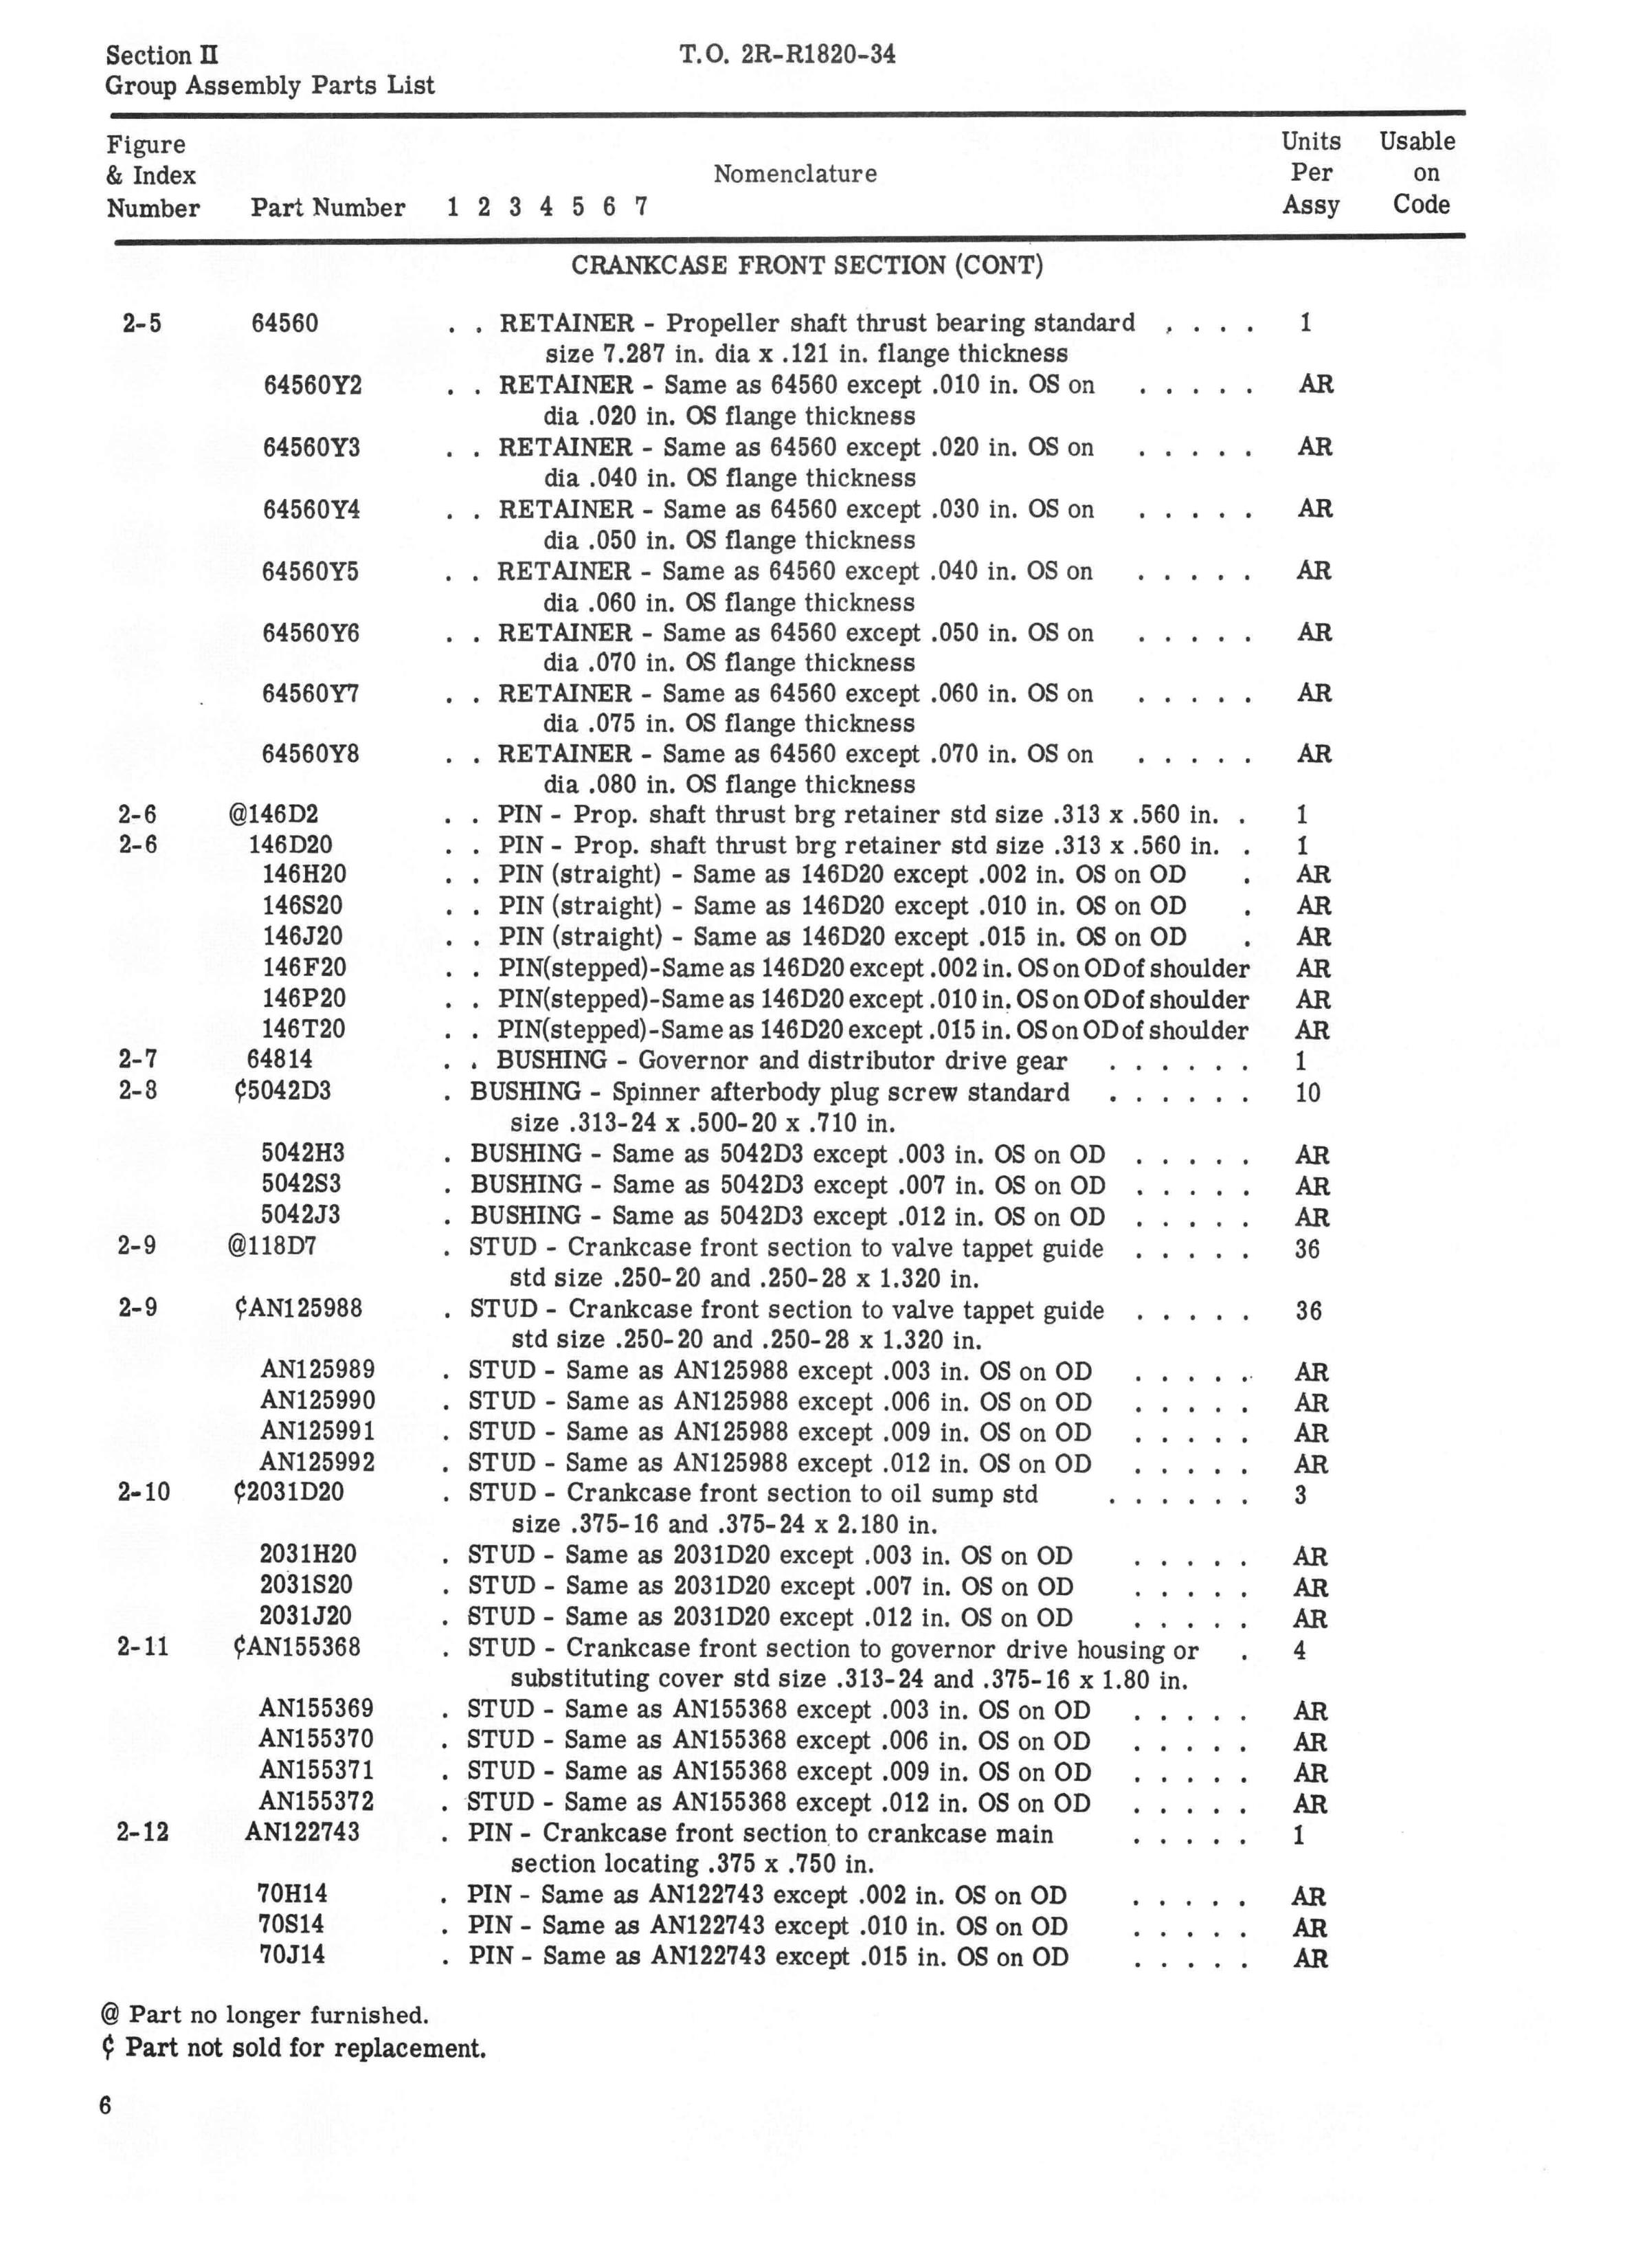 Sample page 10 from AirCorps Library document: Illustrated Parts Breakdown for Model R-1820-103 Engine